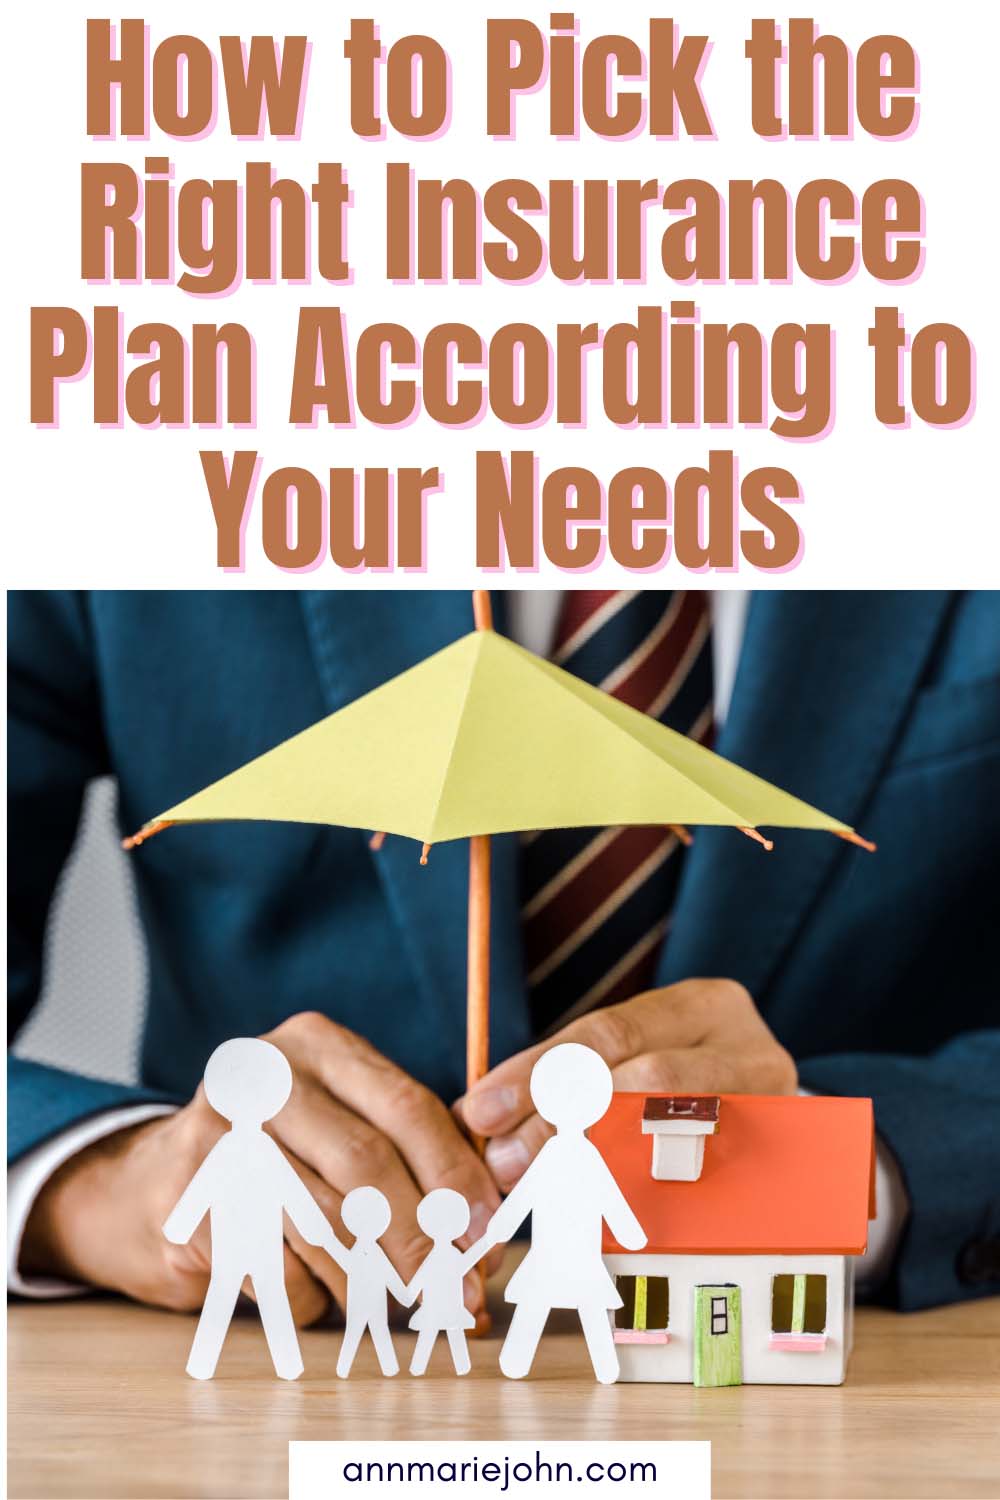 How to Pick the Right Insurance Plan According to Your Needs